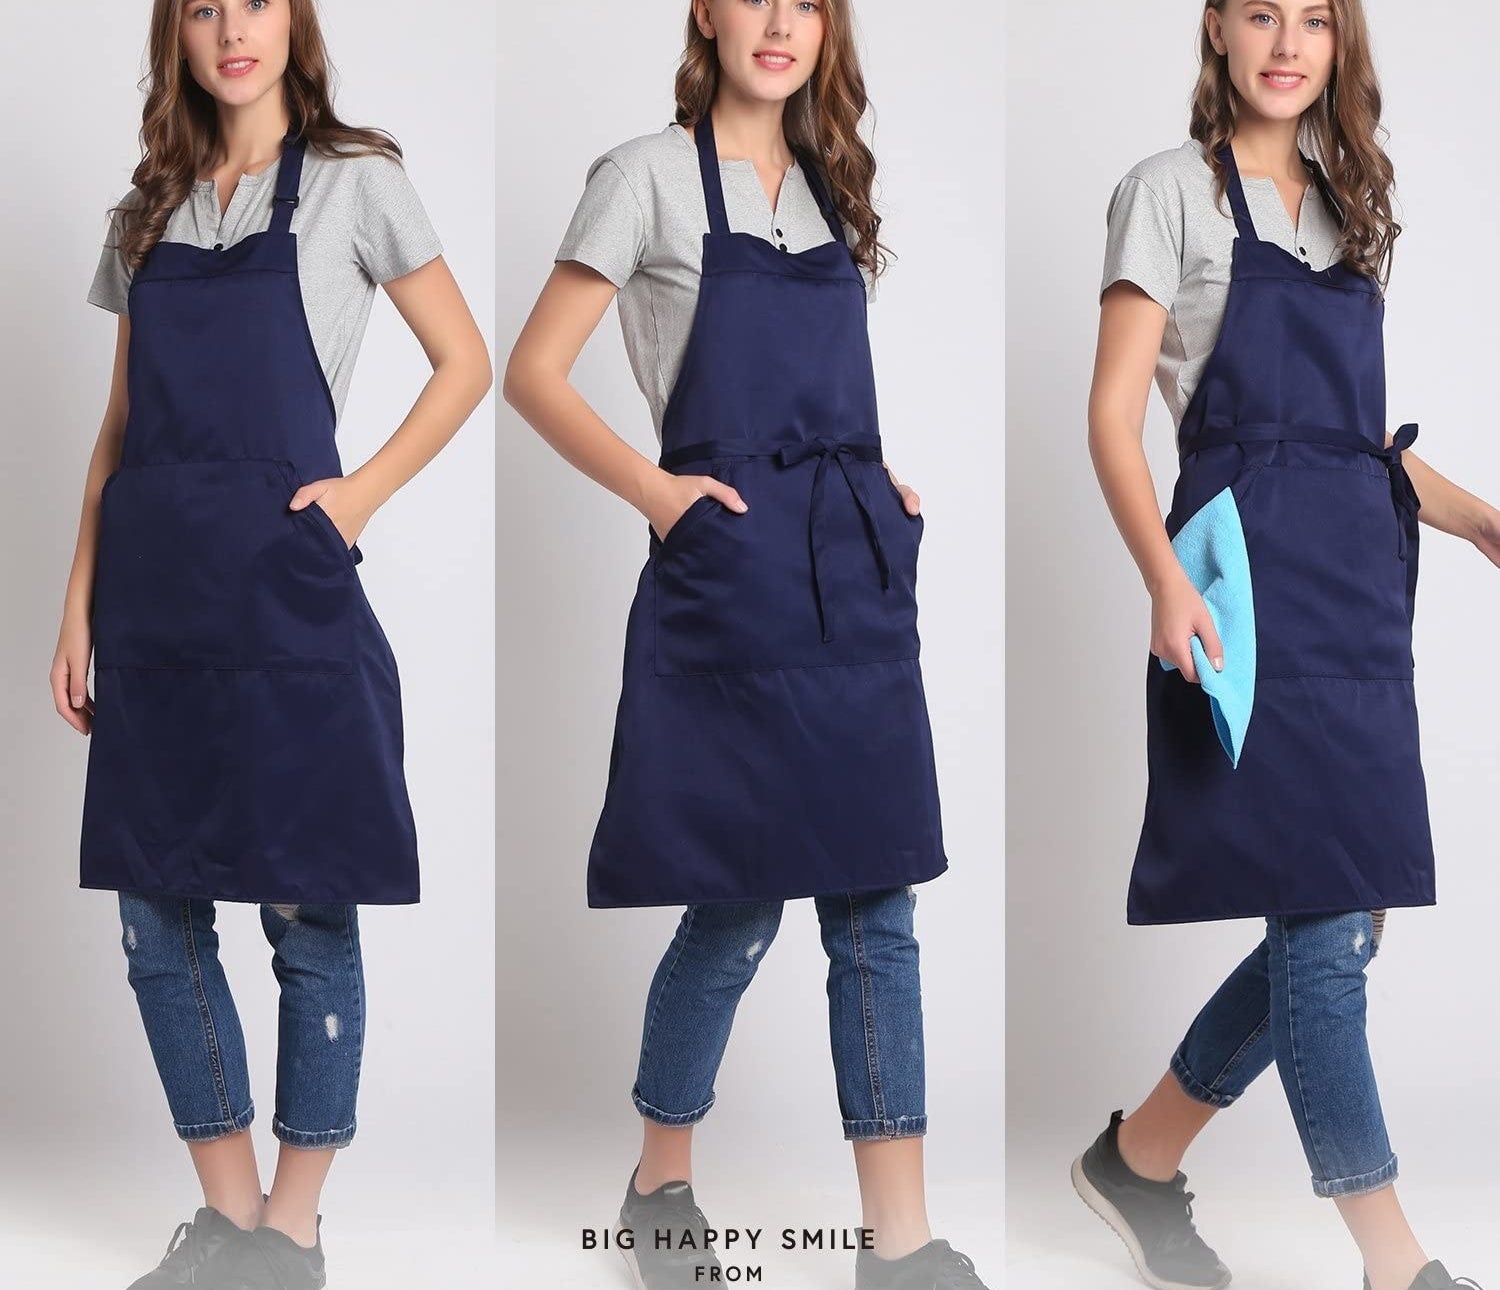 person wearing the apron